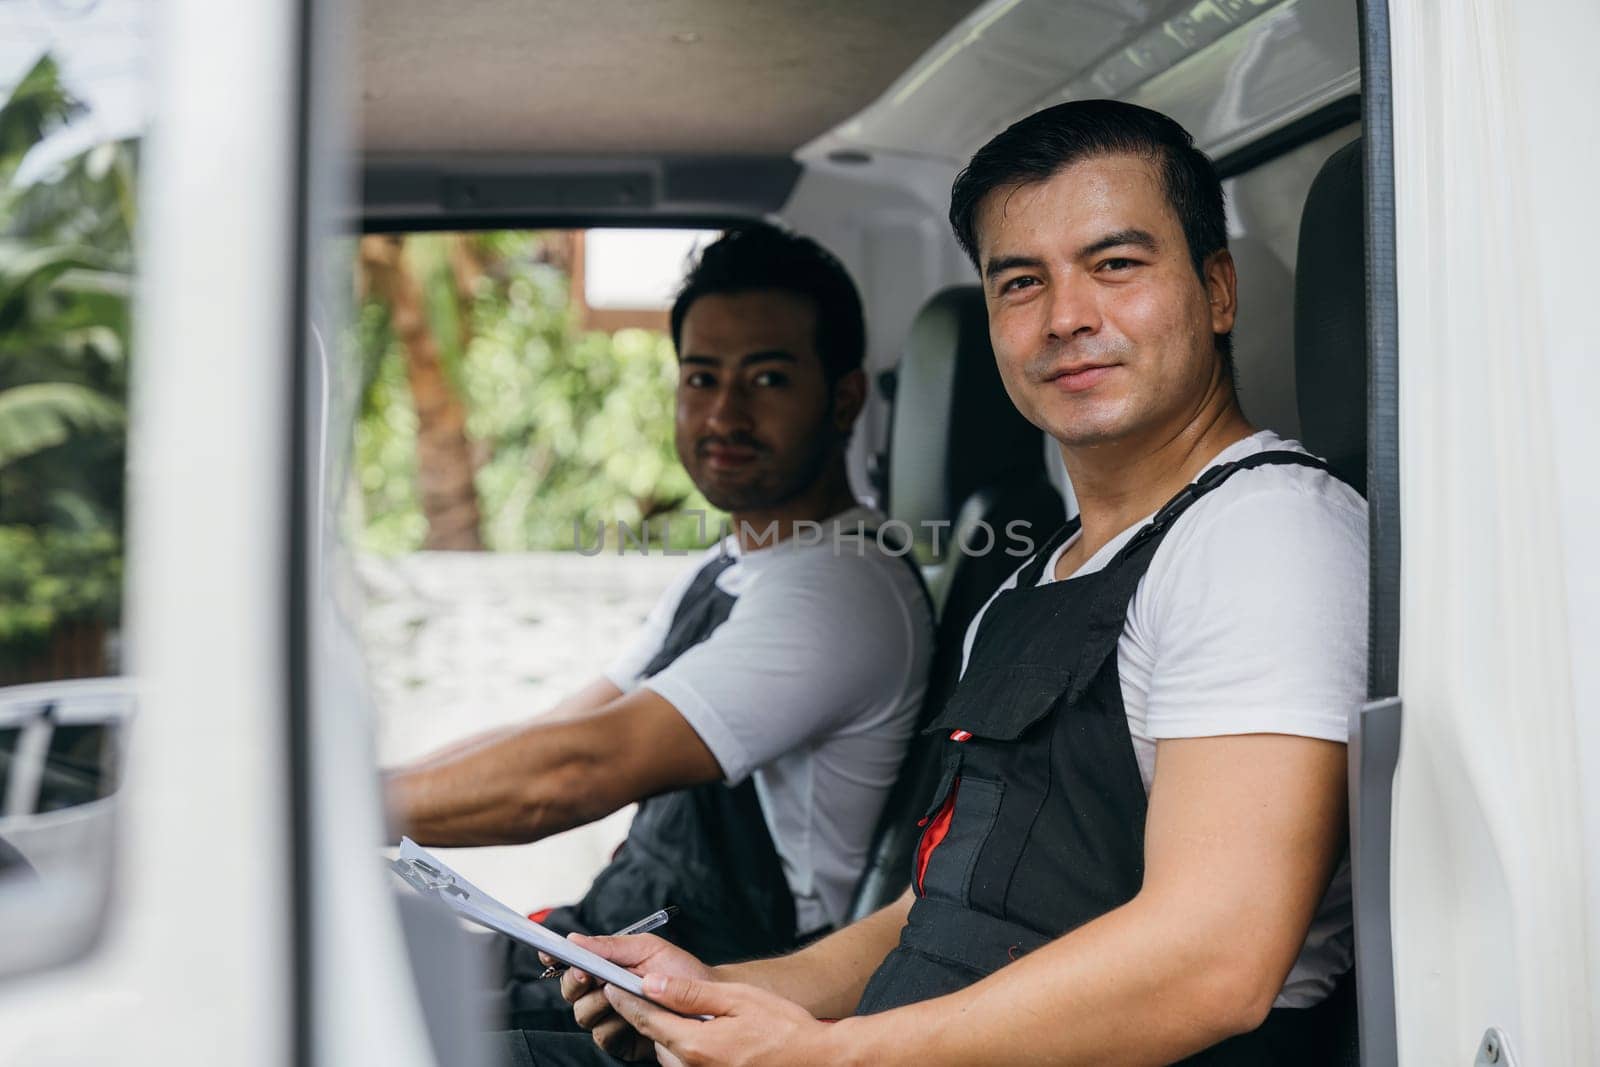 Ethnicity-diverse mover team driving a truck for relocation service. Two smiling workers in uniform delivering furniture with confidence. Transportation and teamwork emphasized. Moving Day Concept.